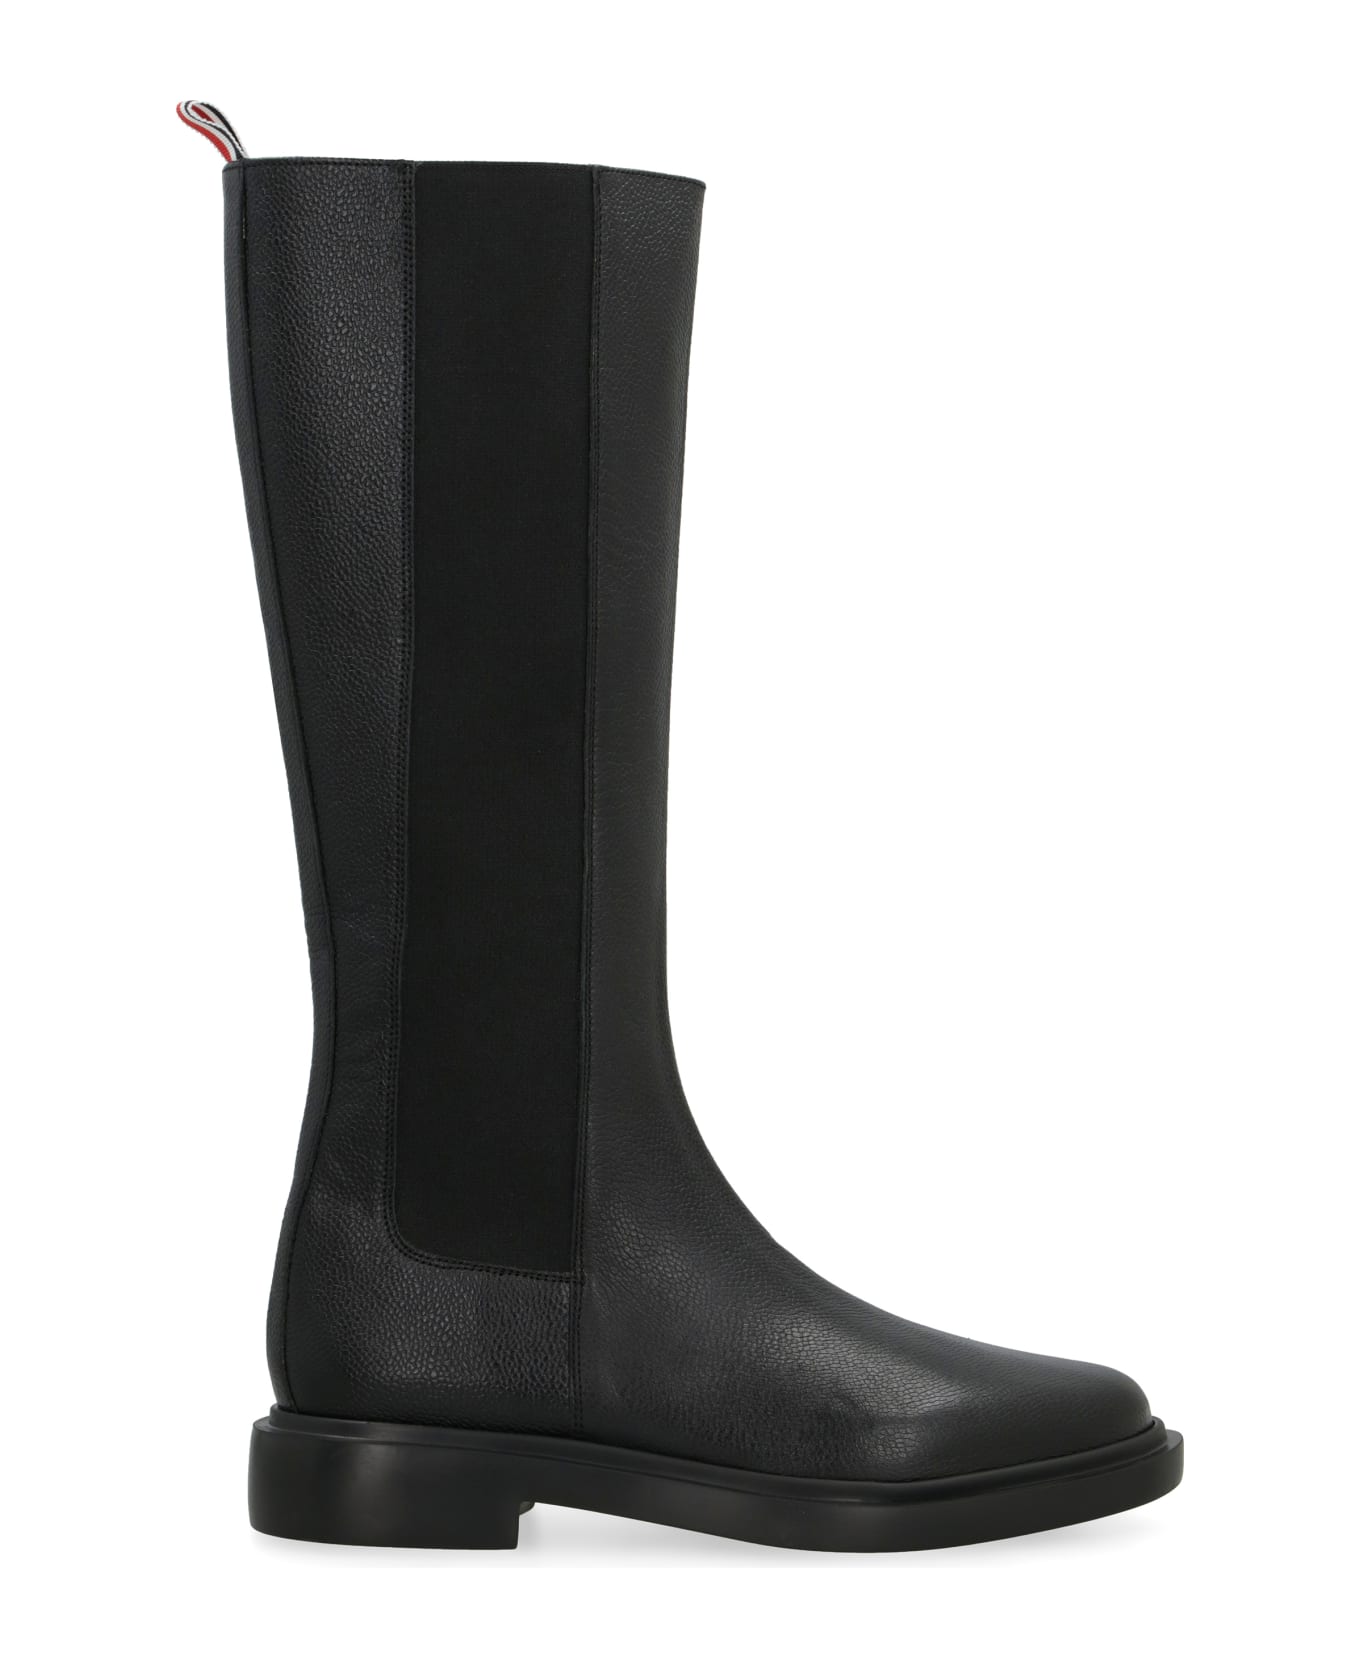 Thom Browne Leather Chelsea Boots - black ブーツ